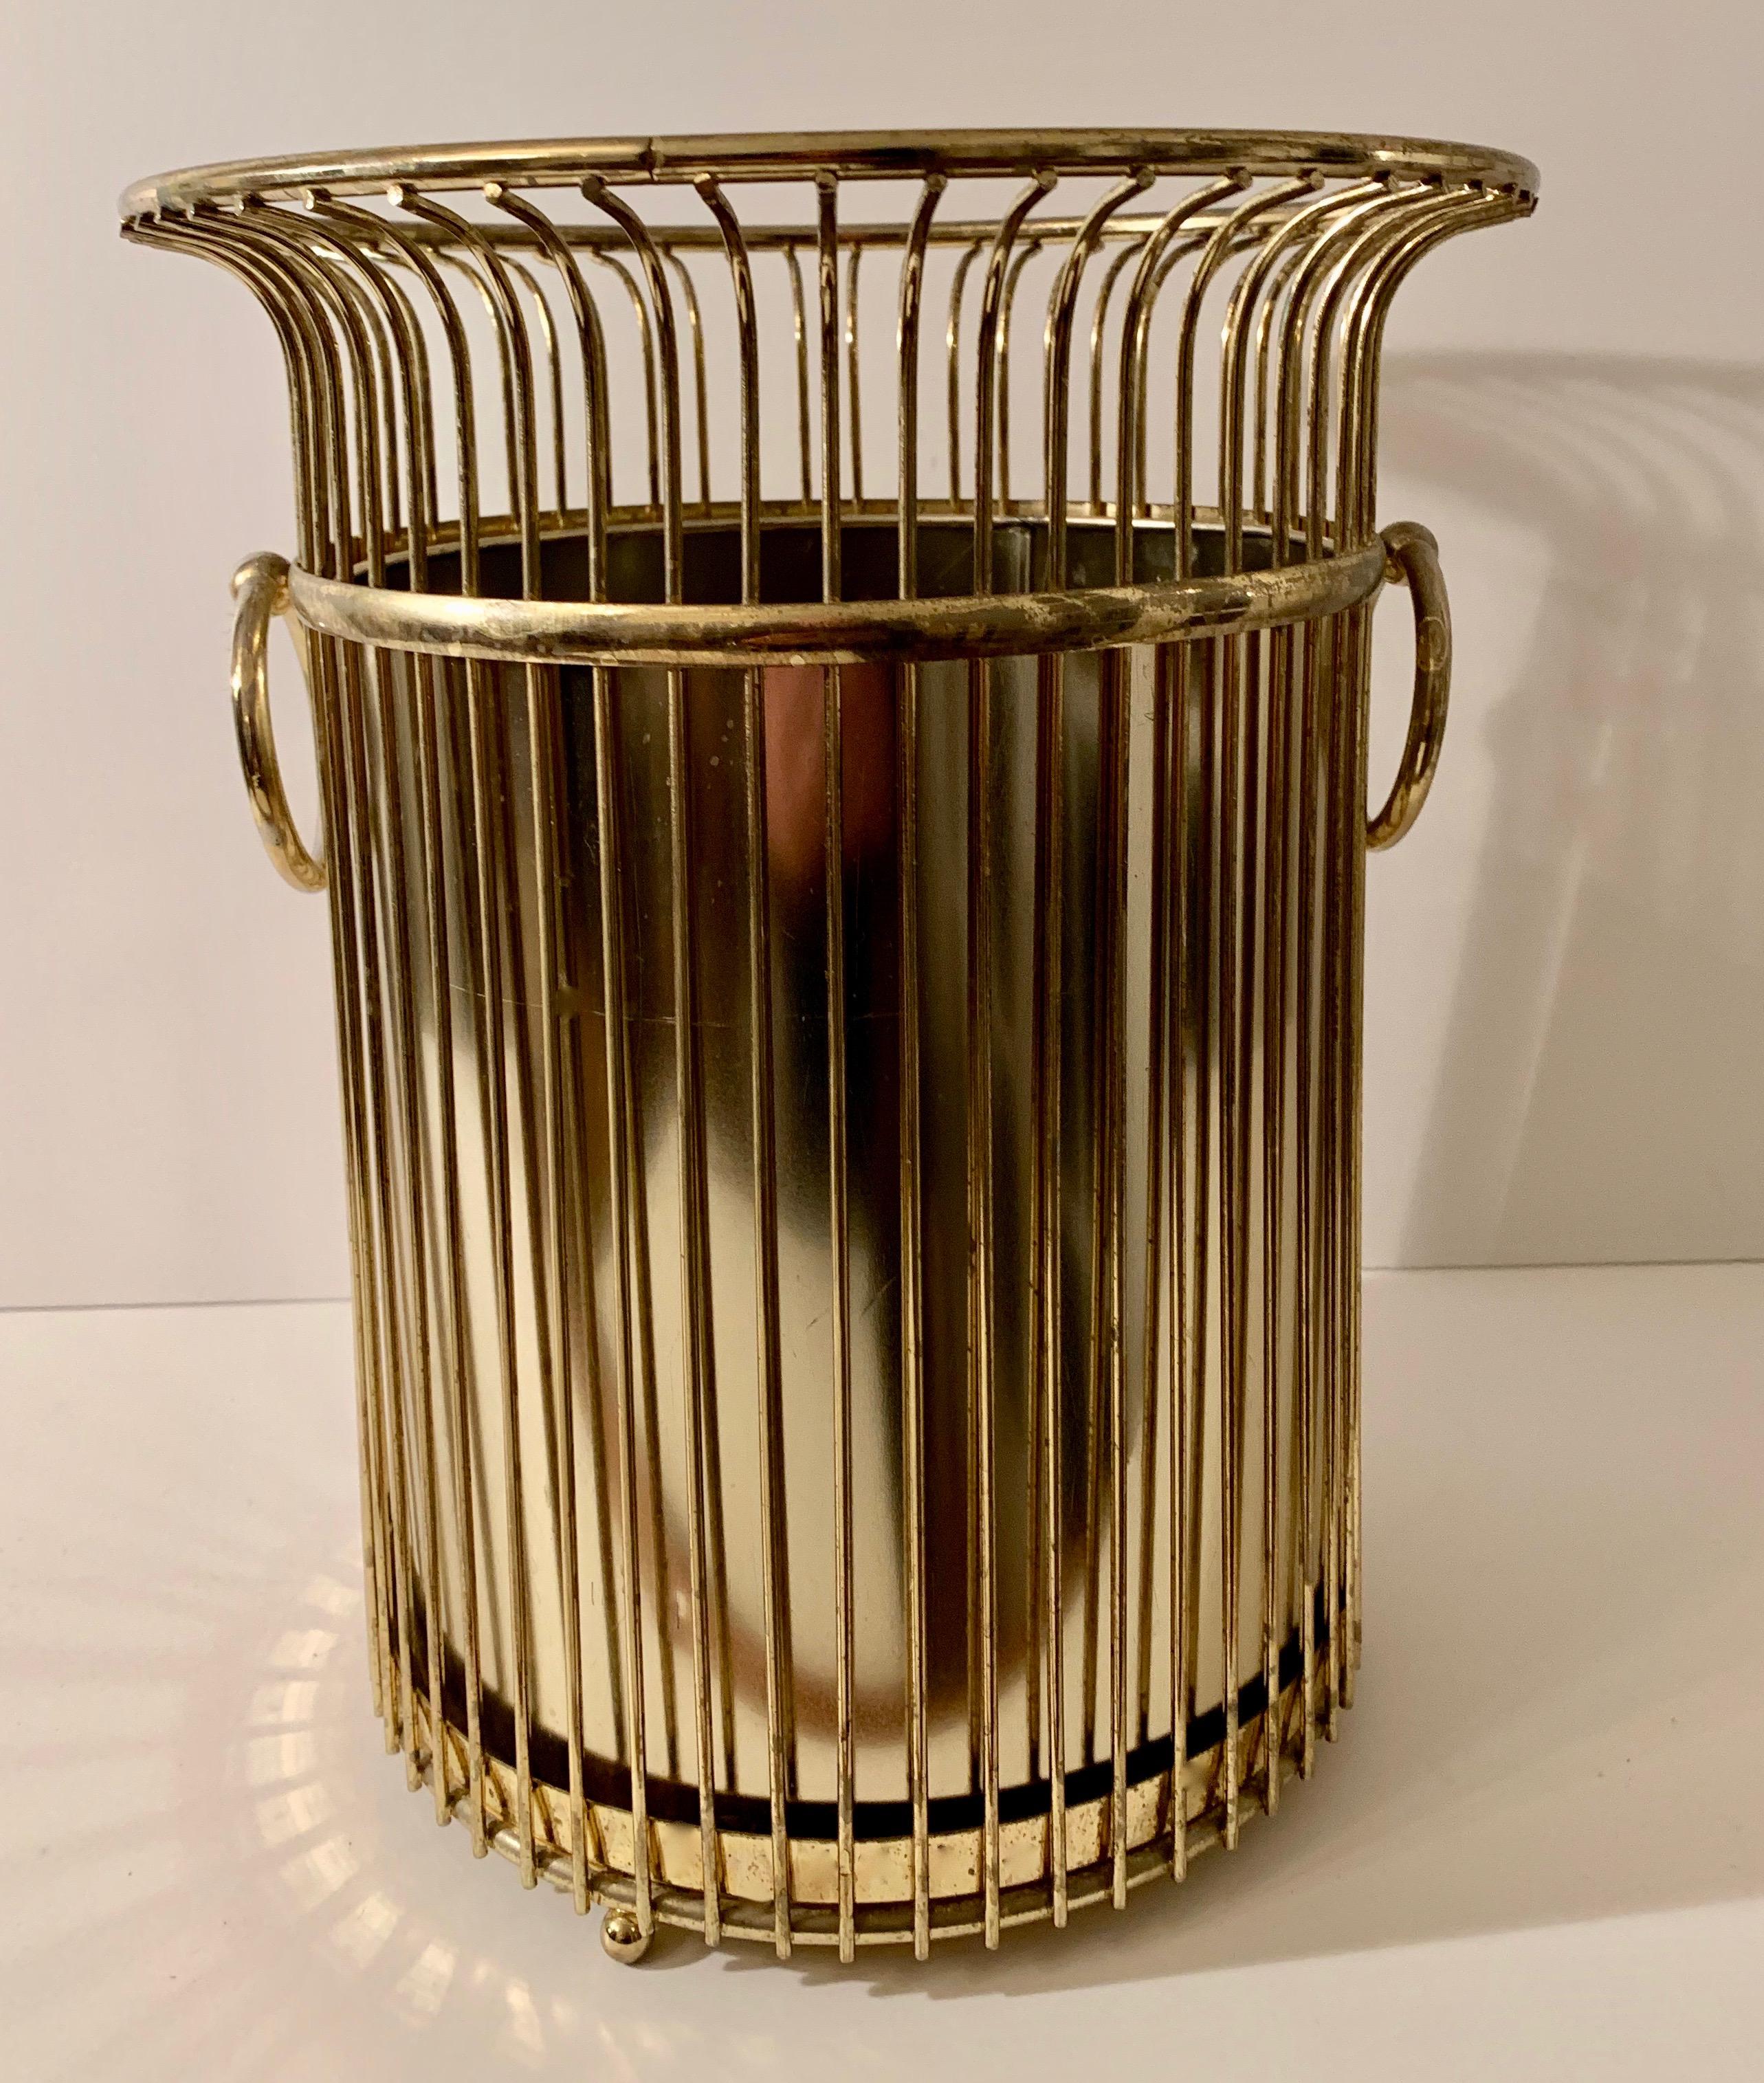 Brass waste can with decorative handles and removable liner Mid-Century Modern Regency style - a very simple and sexy look for any bathroom or office.